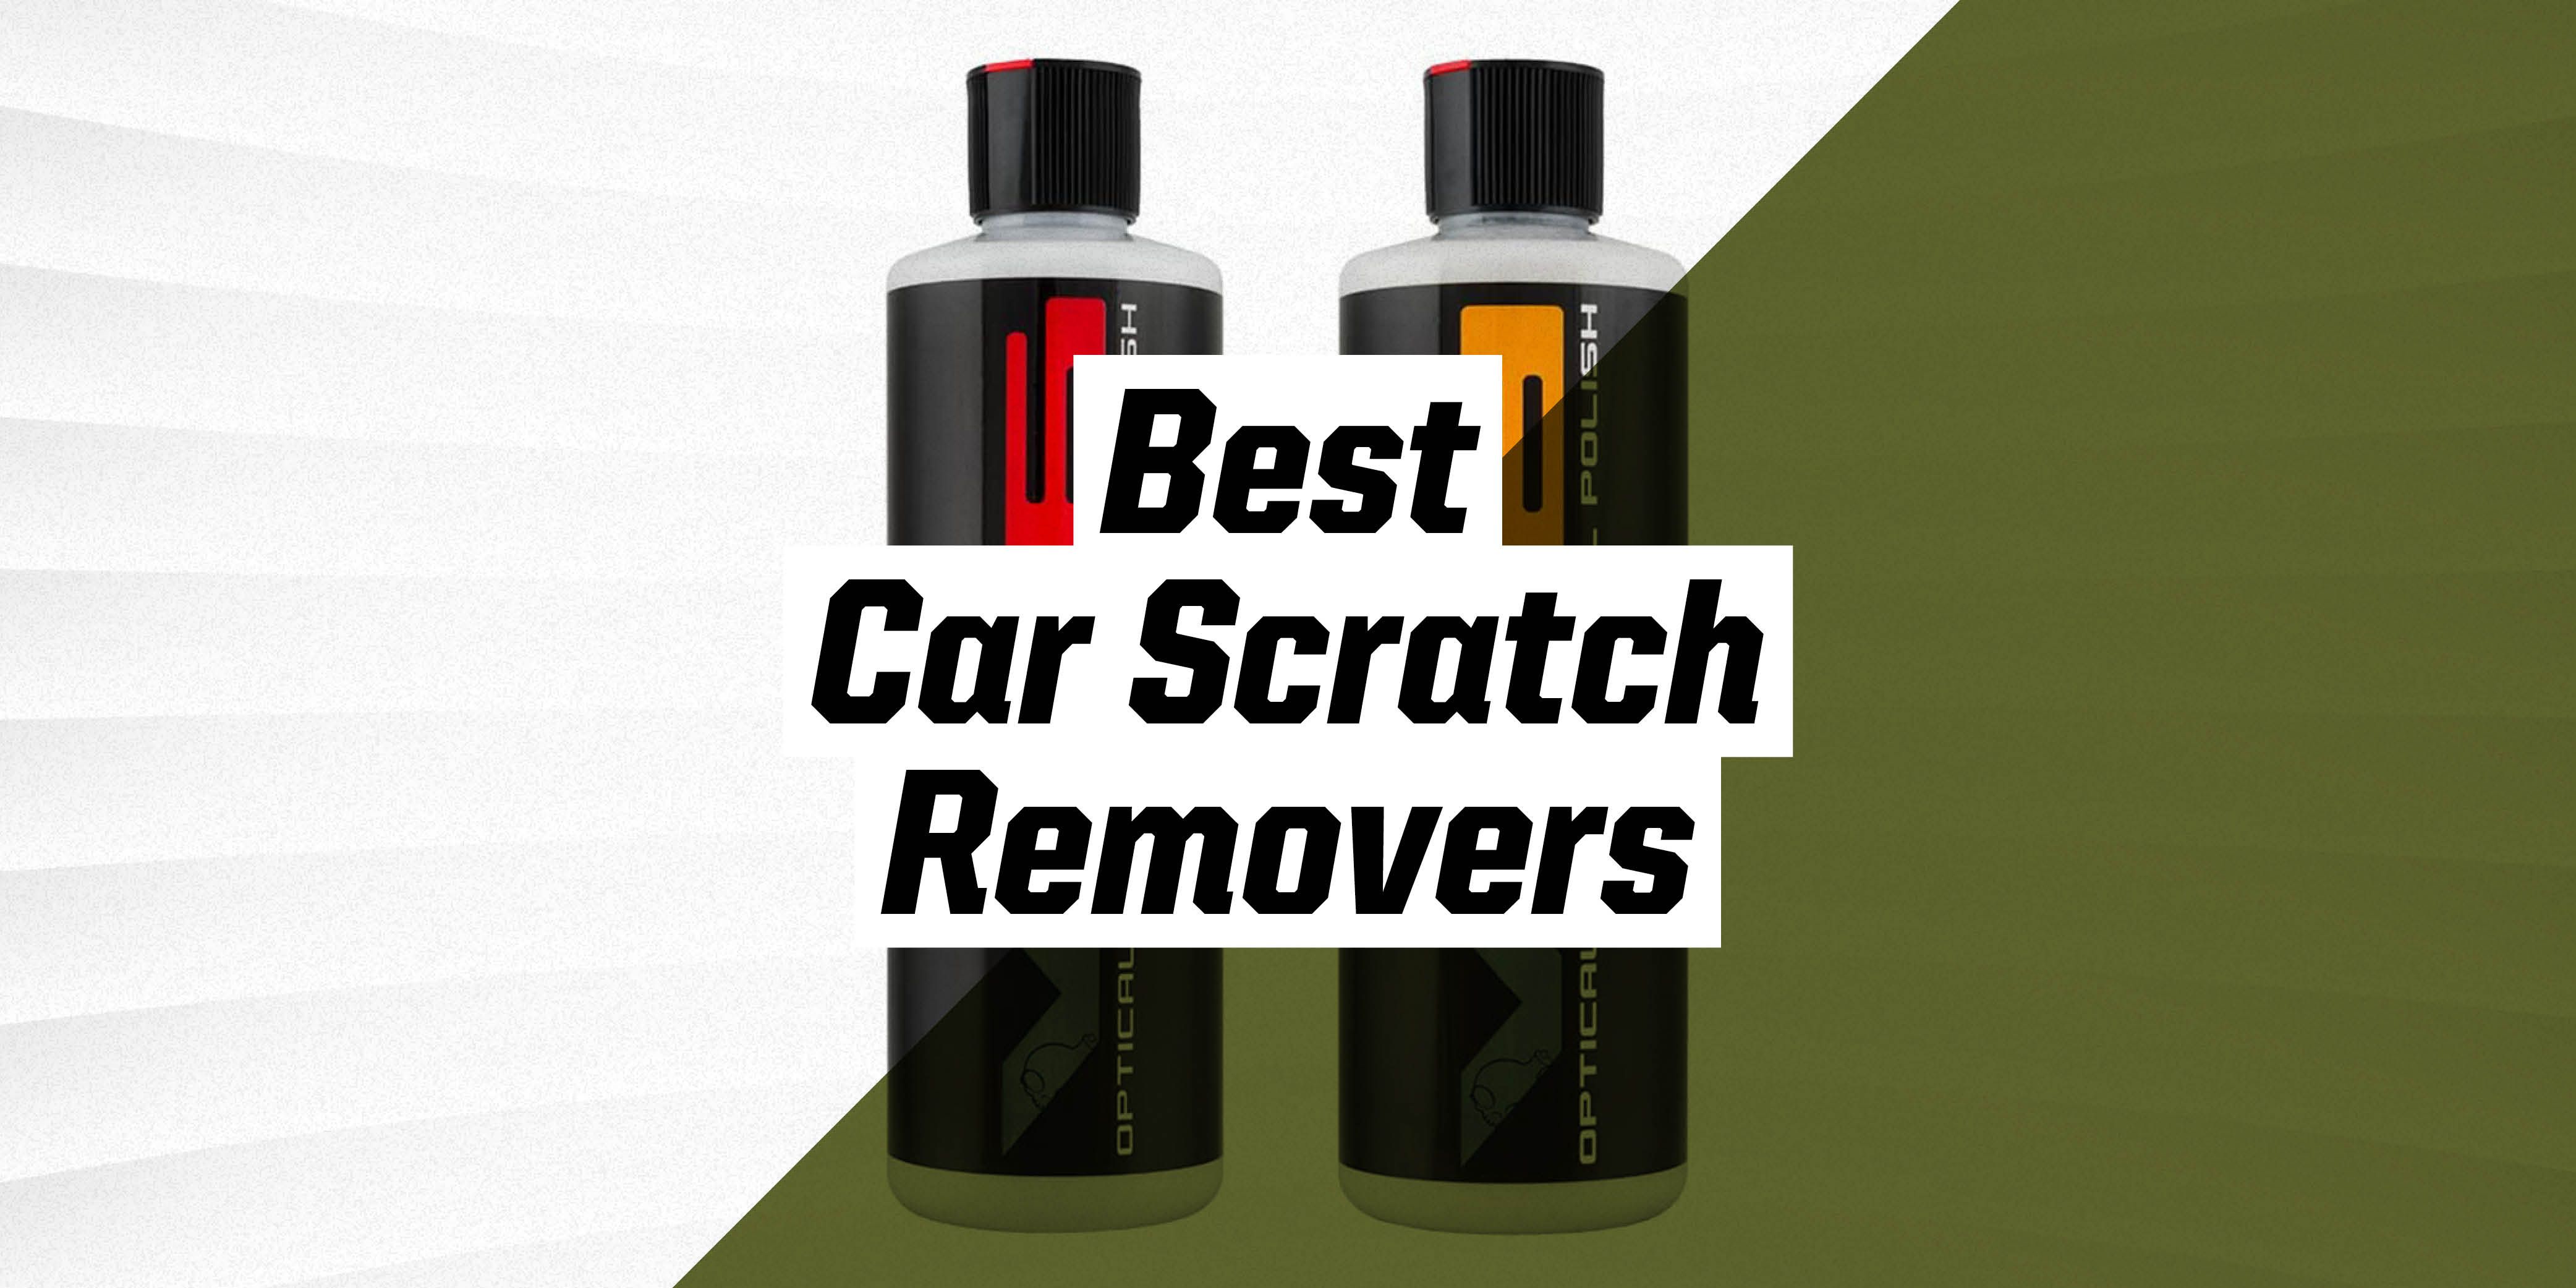 Scuff Remover Polisher Car Paint Scratch Repair Scratch and Swirl Remover Water Spot Remover for Cars Shinecare Car Scratch Remover Blemish Remover. 